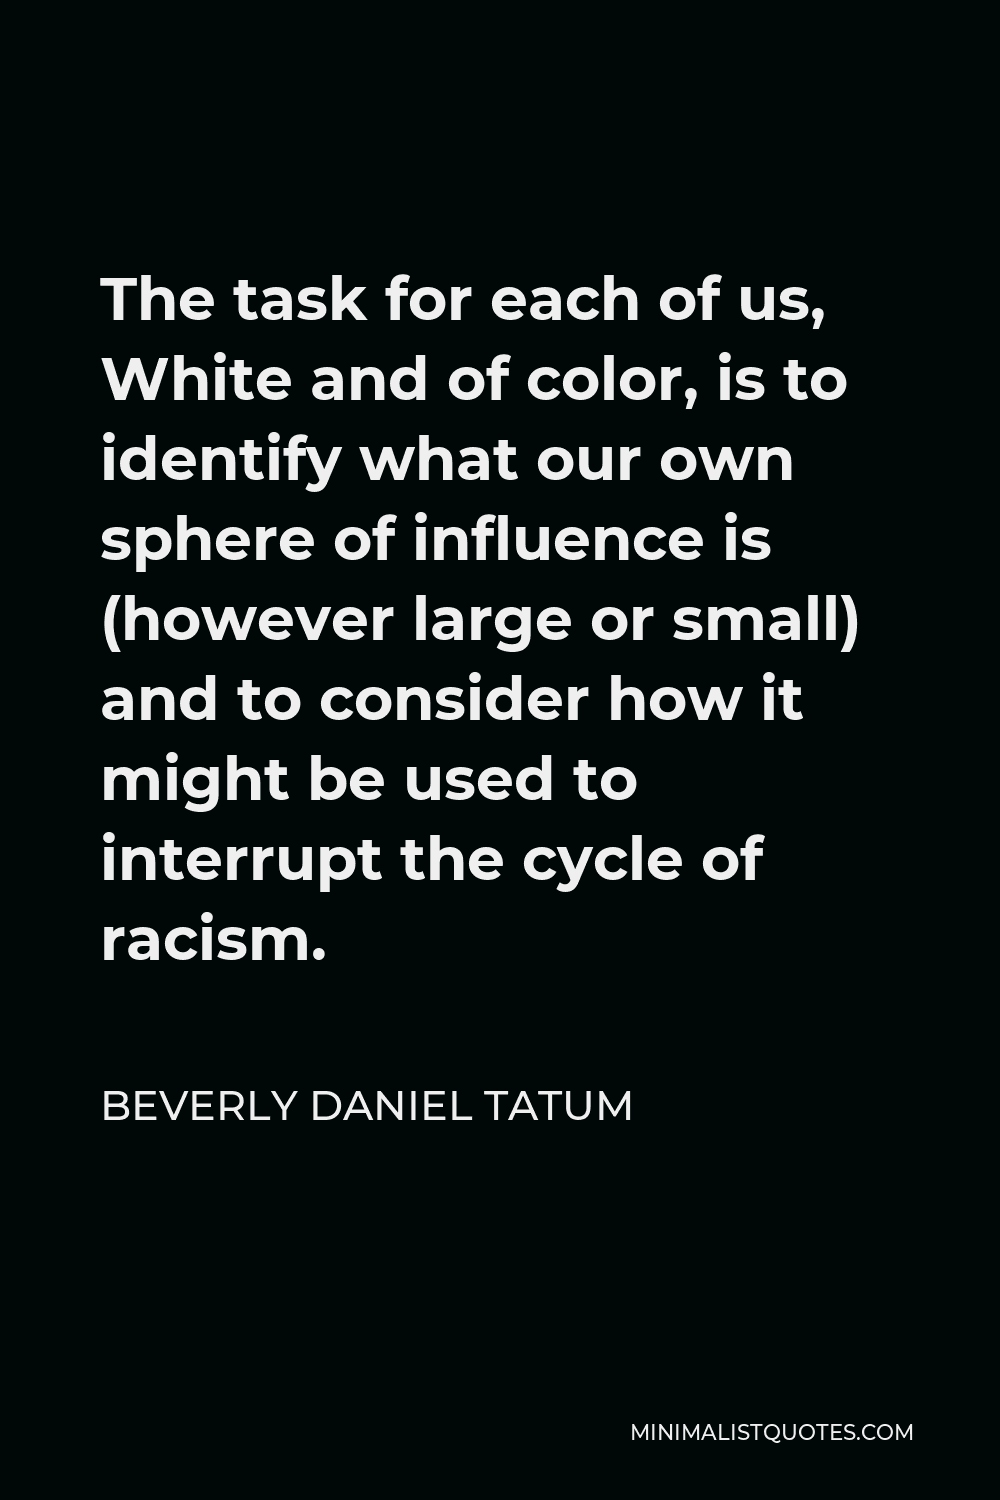 Beverly Daniel Tatum Quote - The task for each of us, White and of color, is to identify what our own sphere of influence is (however large or small) and to consider how it might be used to interrupt the cycle of racism.